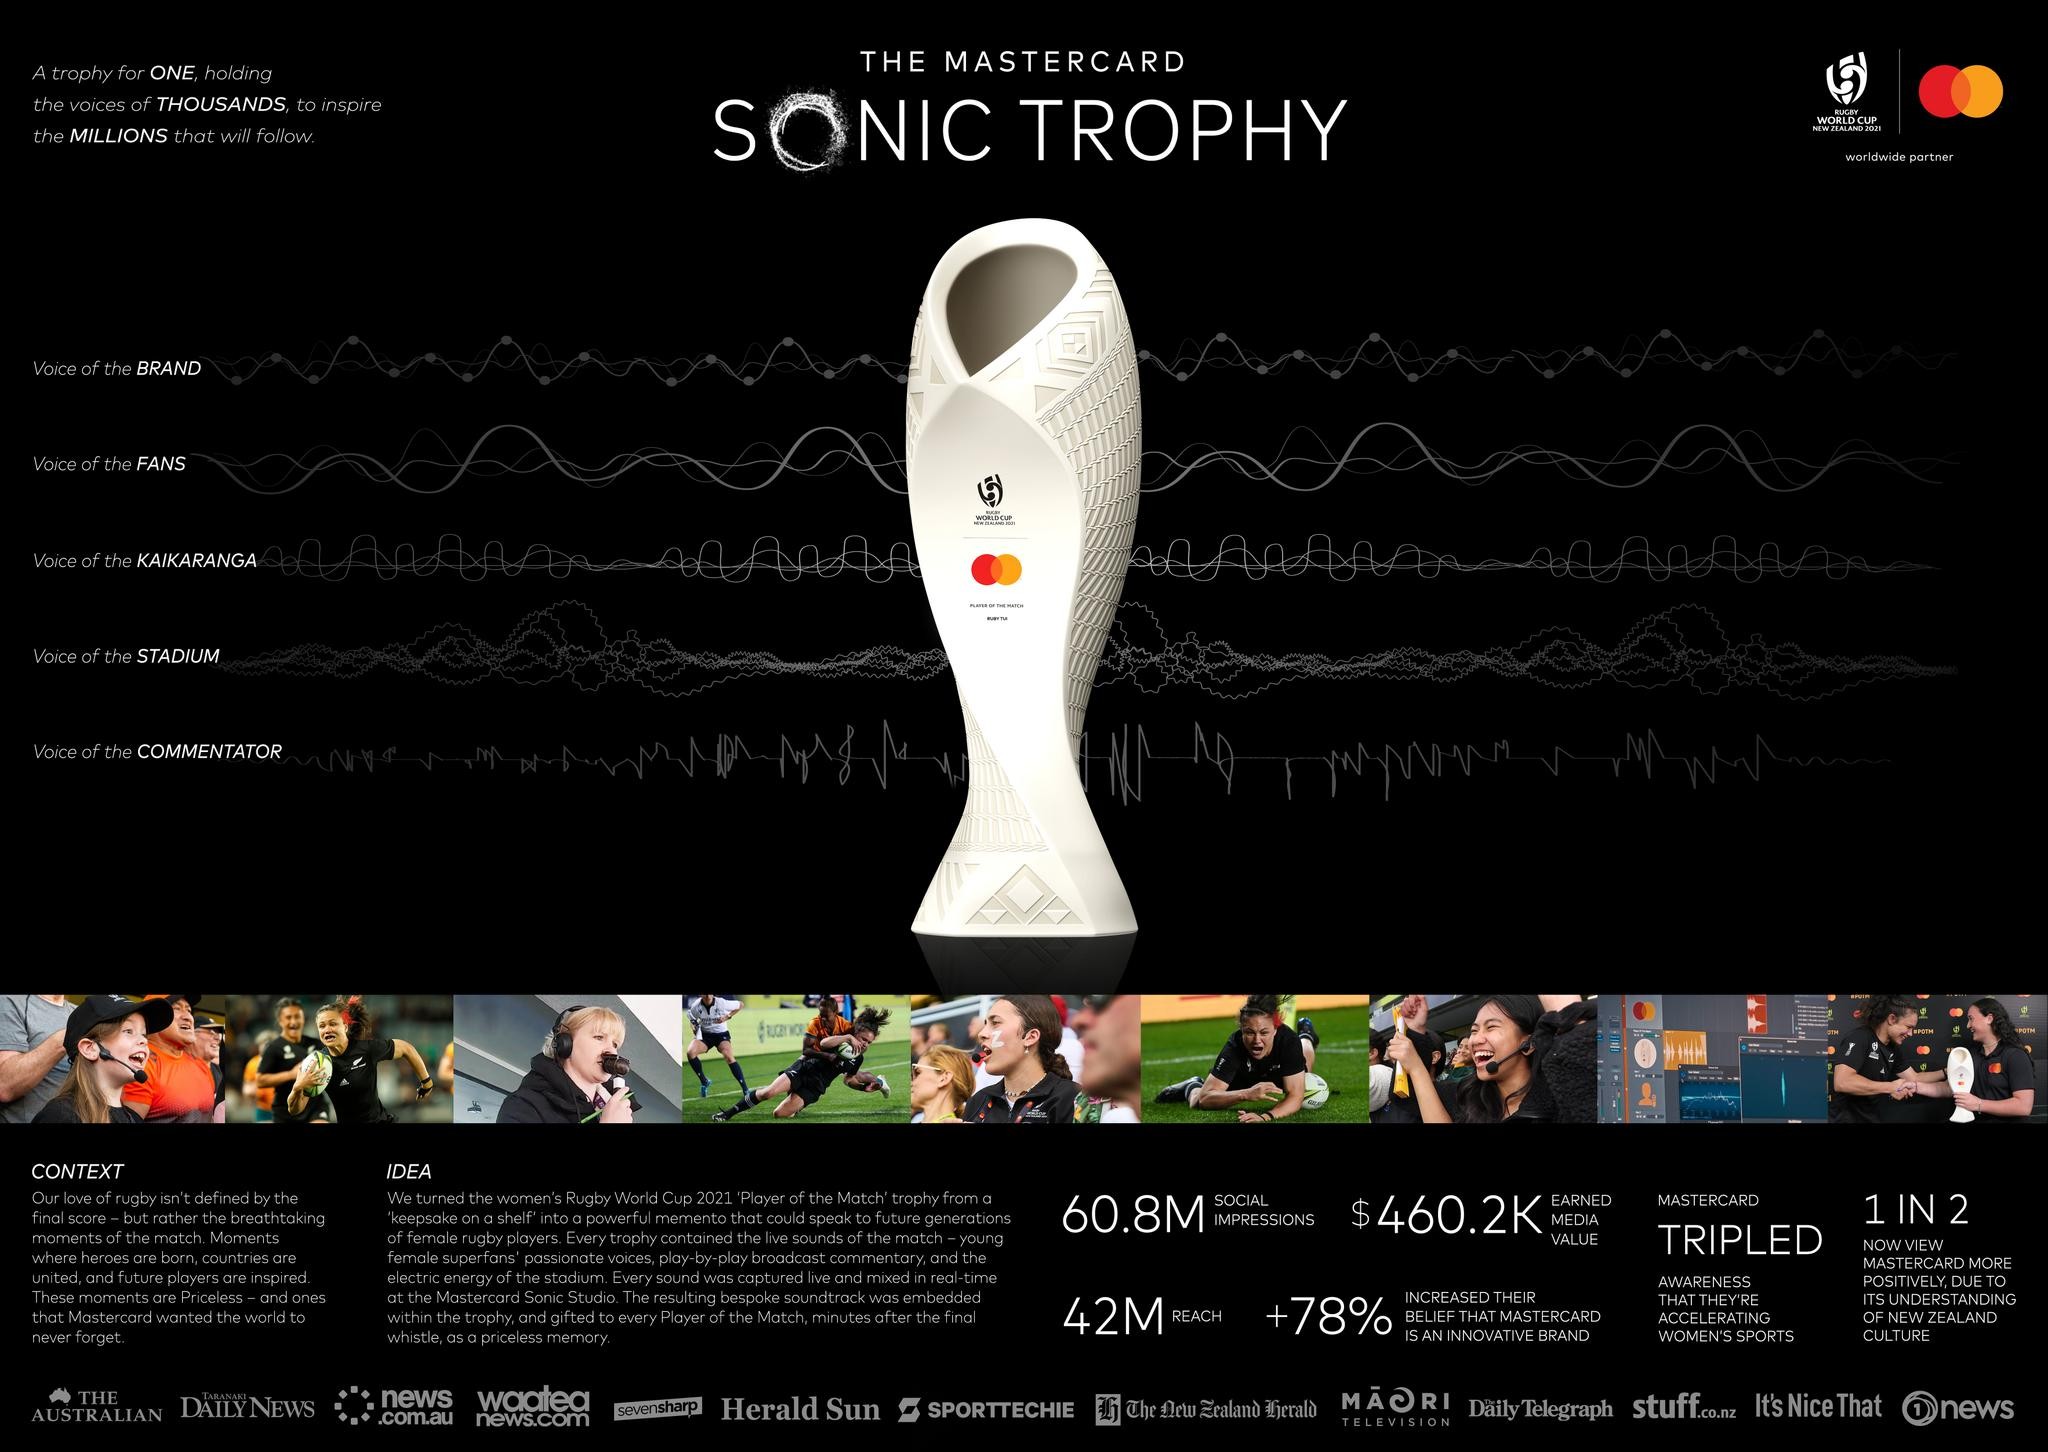 The Mastercard Sonic Trophy